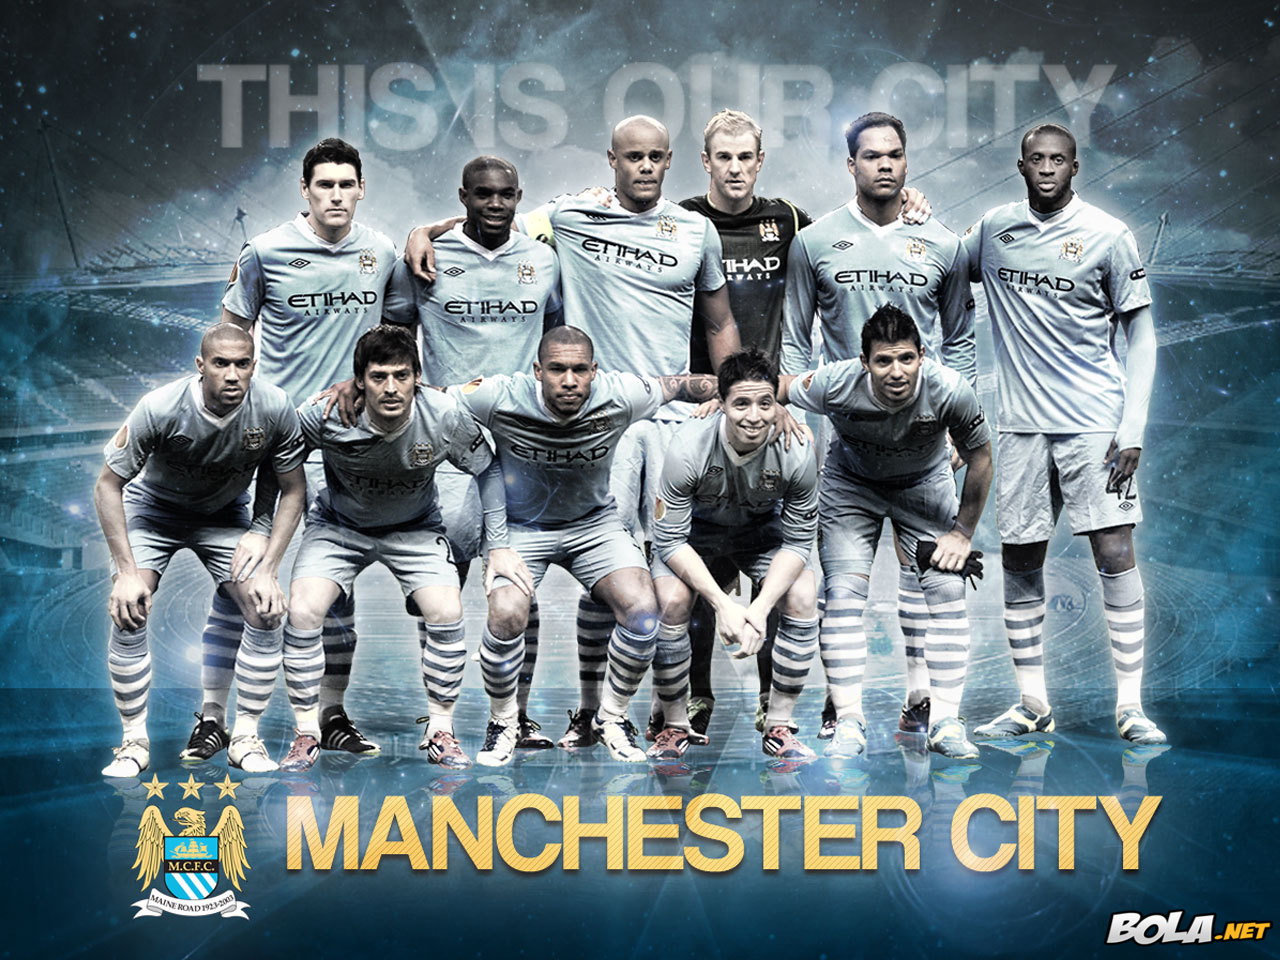 Download Wallpaper Manchester City Bolanet